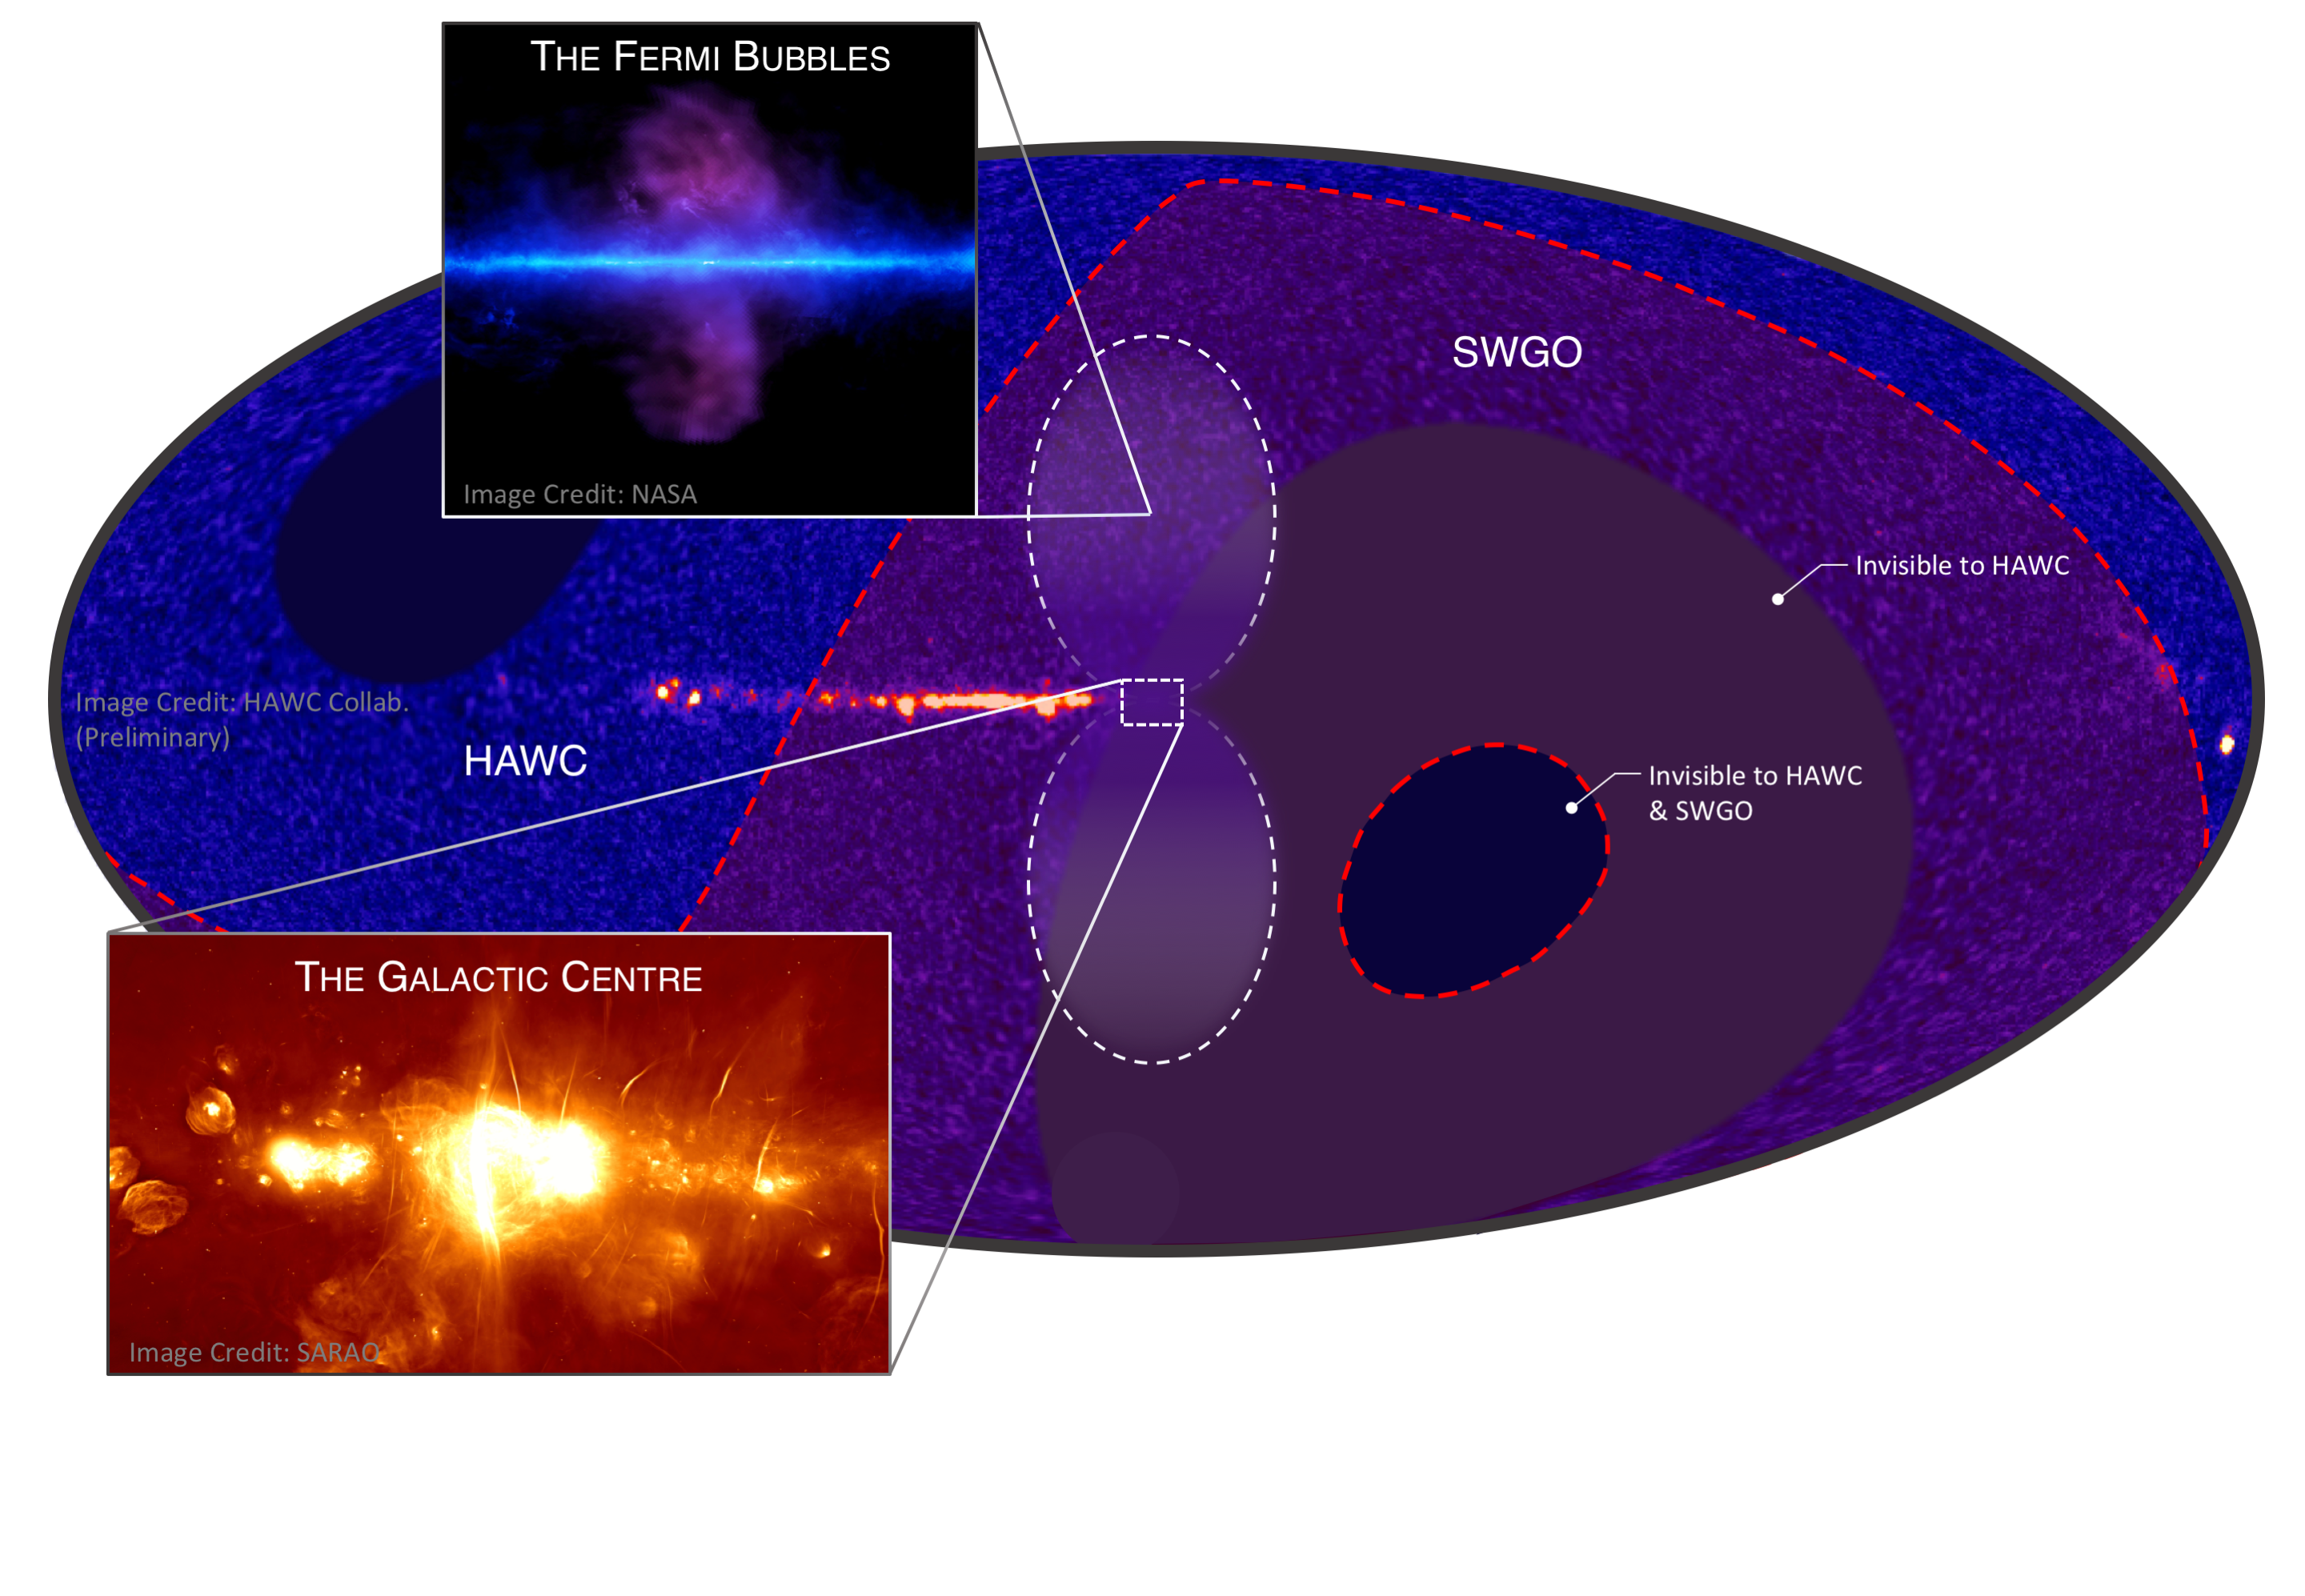 Gamma-ray sky image as seen by the (current) HAWC and (future) SWGO observatories